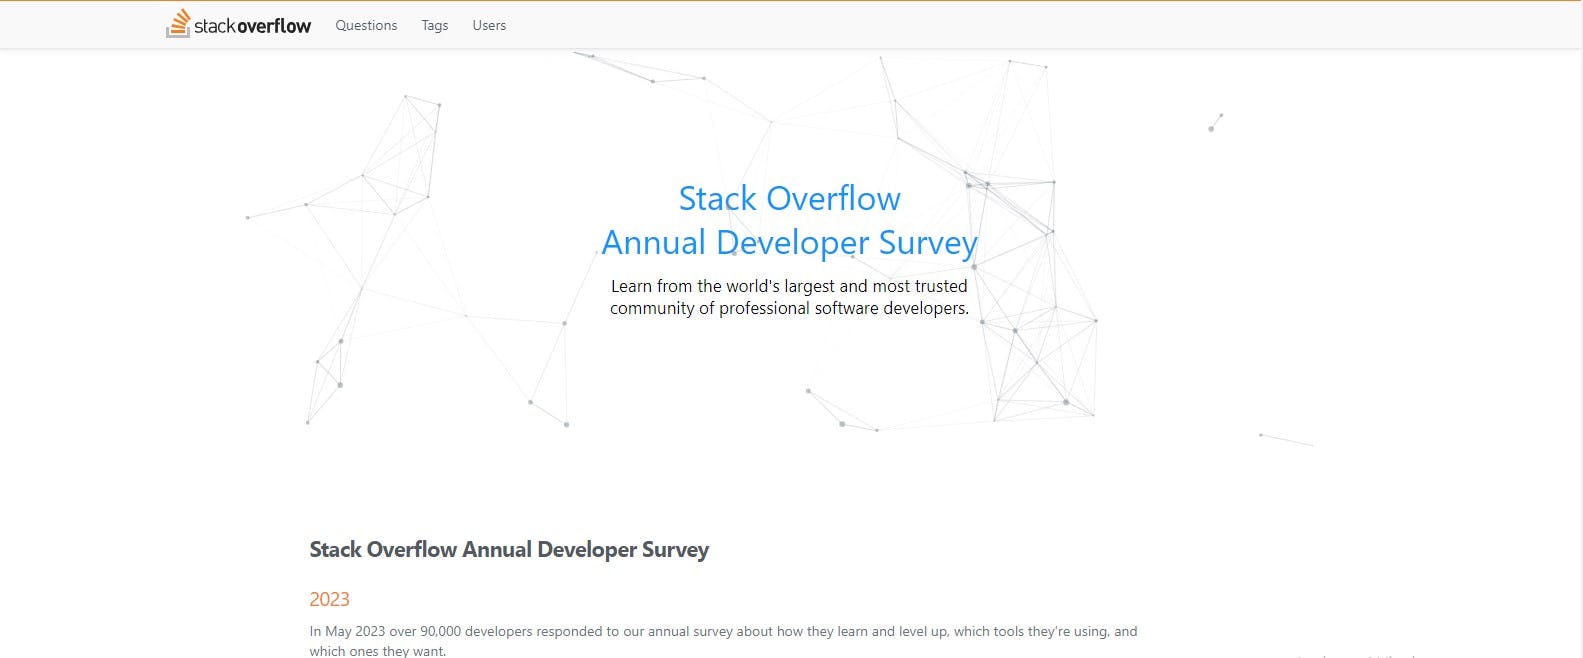 Stack Overflow Developer Survey offers valuable information to inform your tech stack decisions